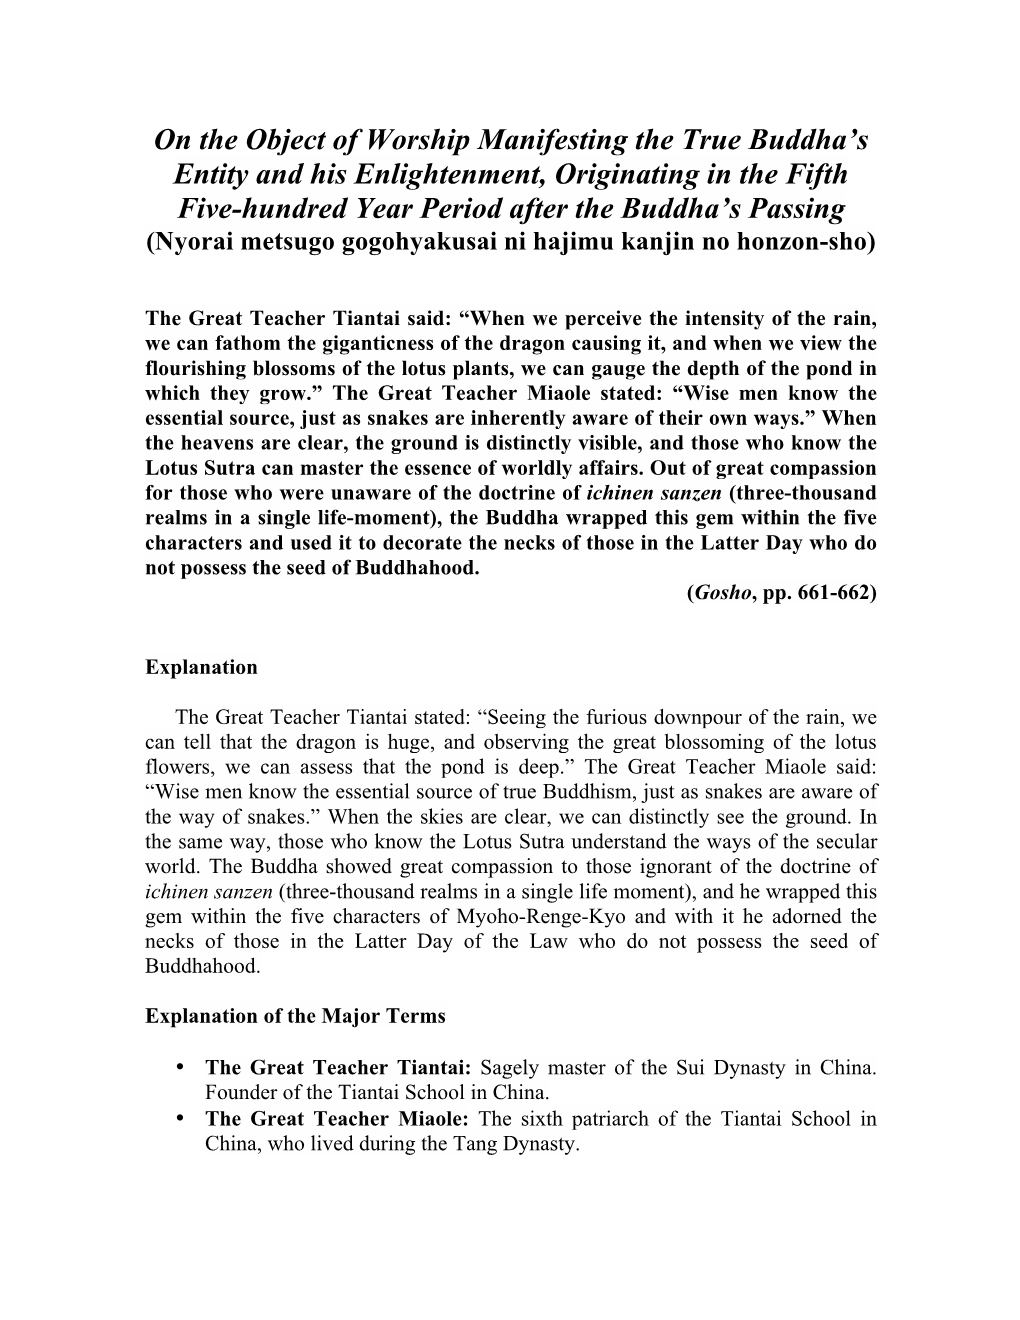 On the Object of Worship Manifesting the True Buddha's Entity and His